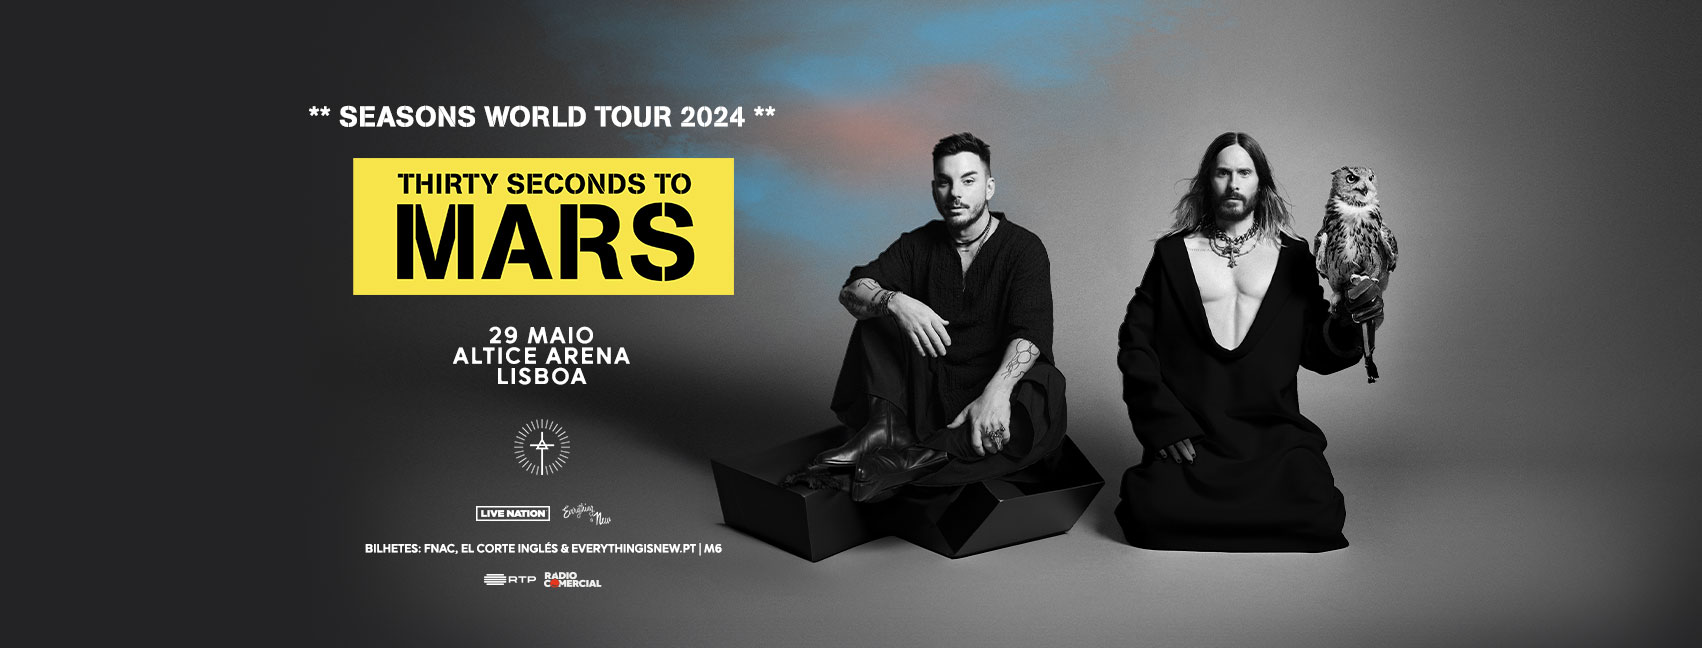 30 thirty seconds to mars lisboa portugal altice arena 2024